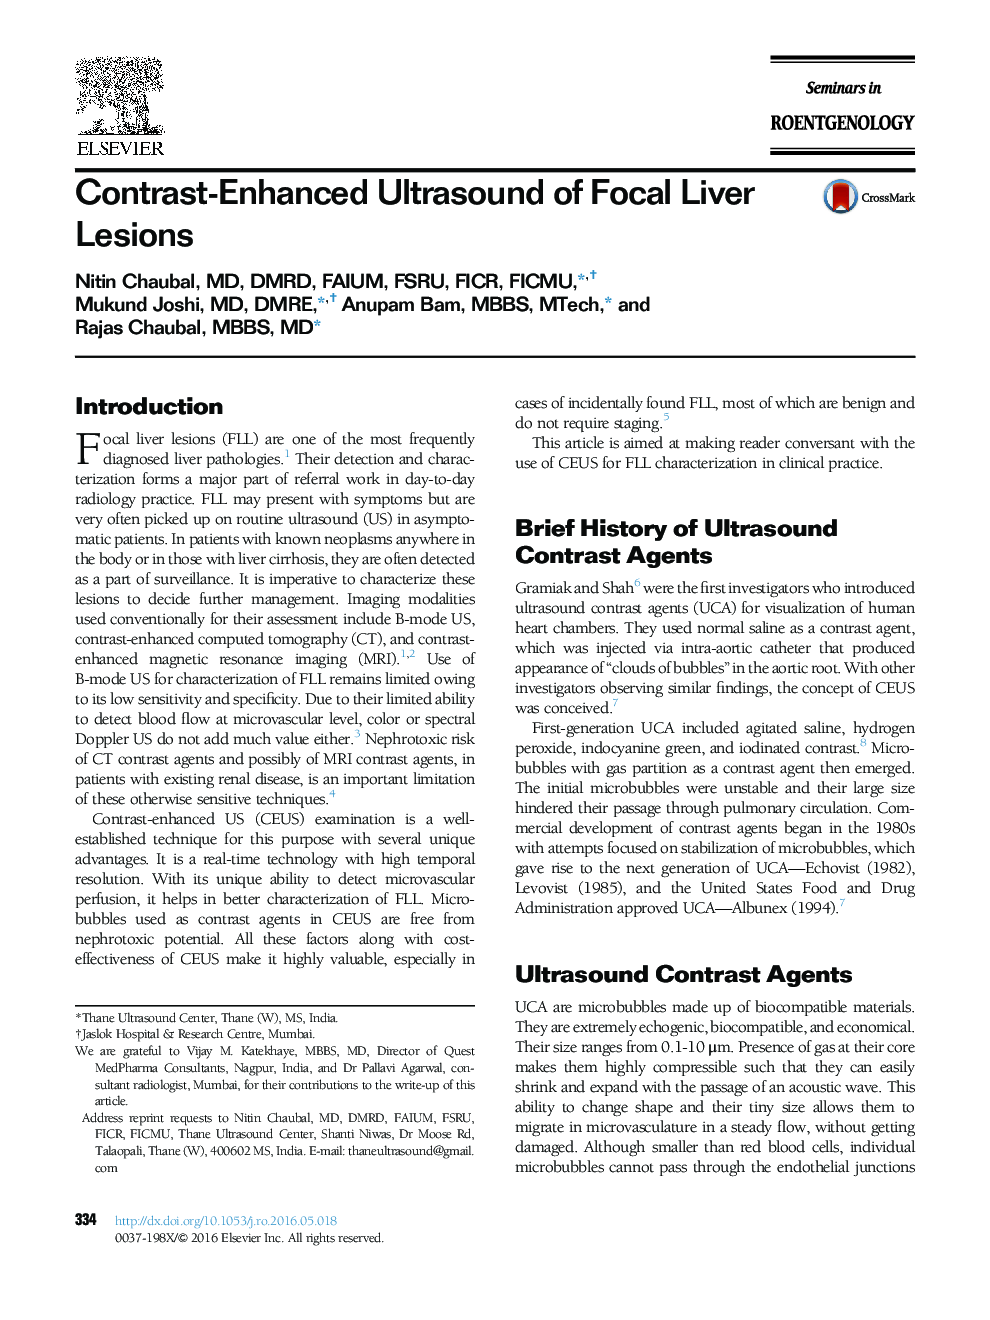 Contrast-Enhanced Ultrasound of Focal Liver Lesions